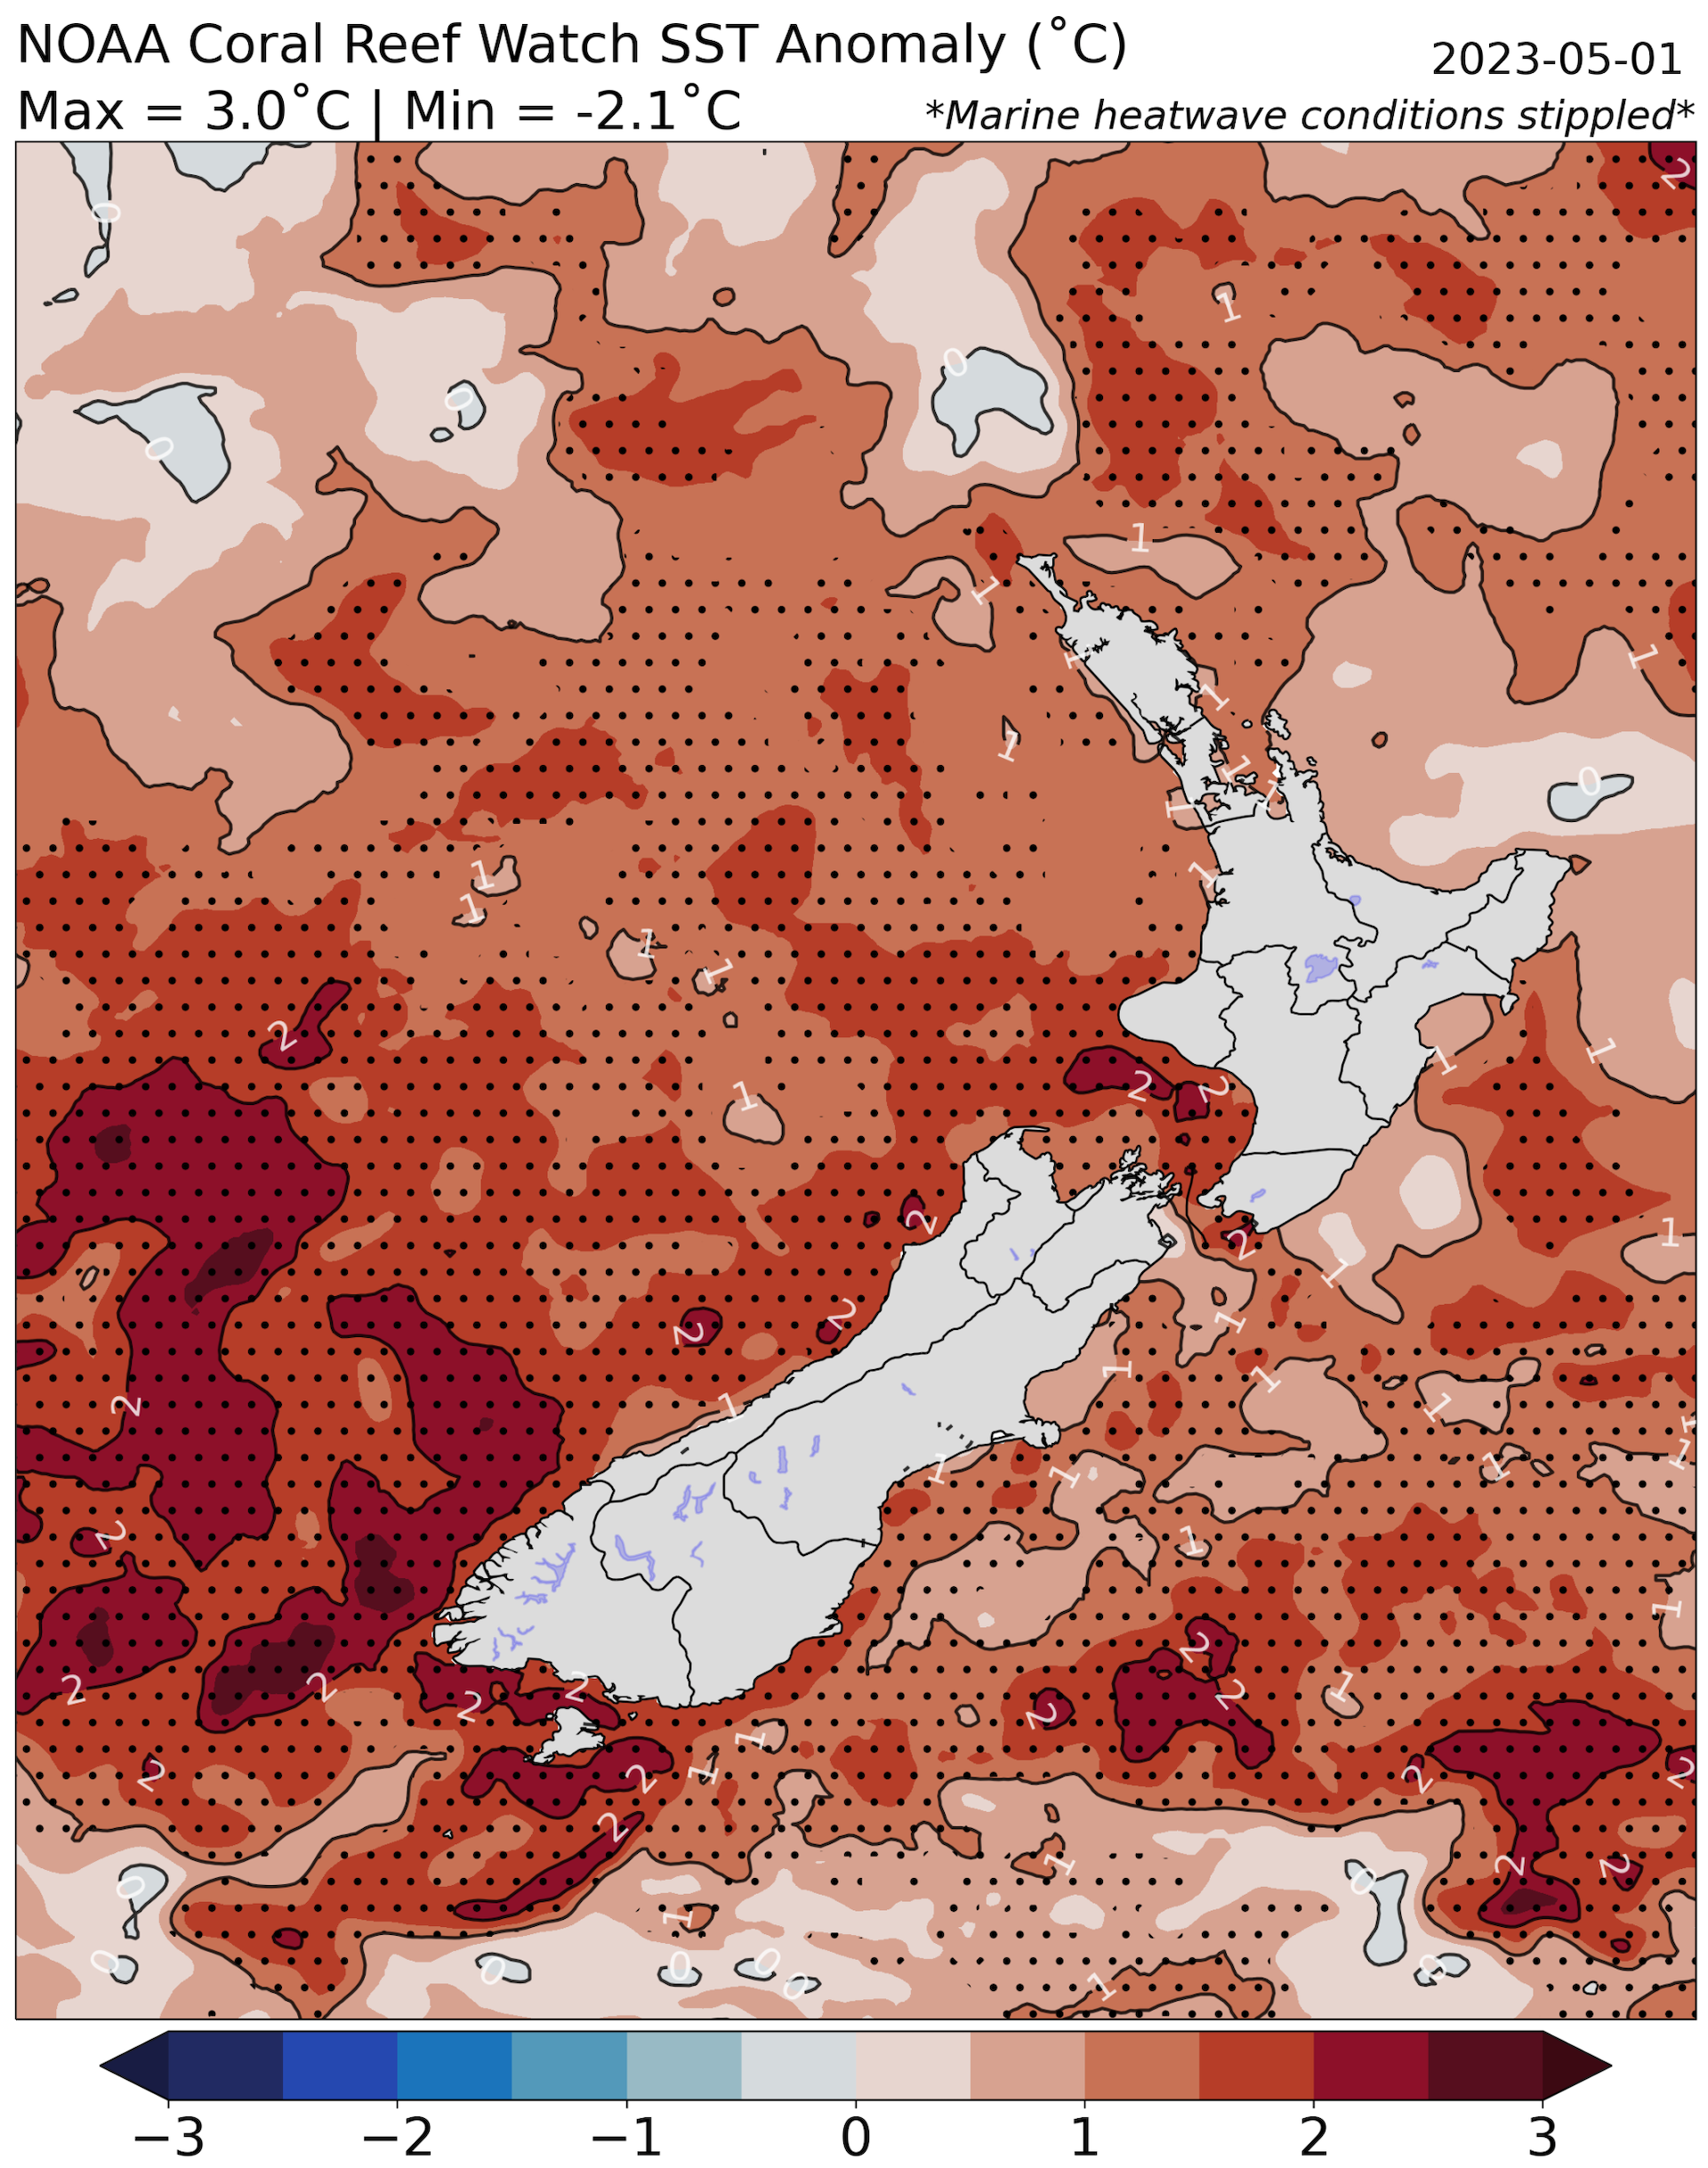 A map showing surface temperatures around Aotearoa for May 1, 2023, with stippled areas marking marine heatwaves.